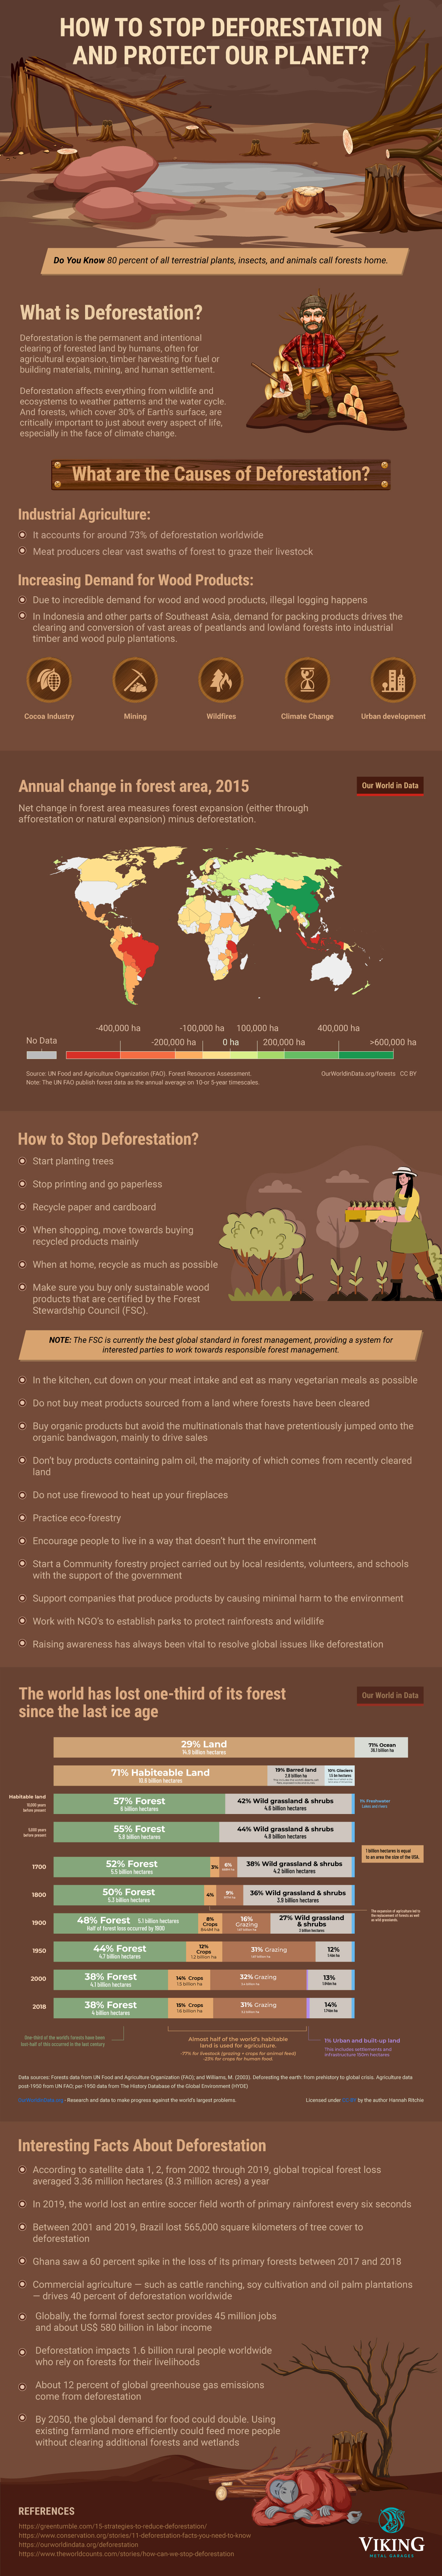 How to Stop Deforestation and Protect Our Planet